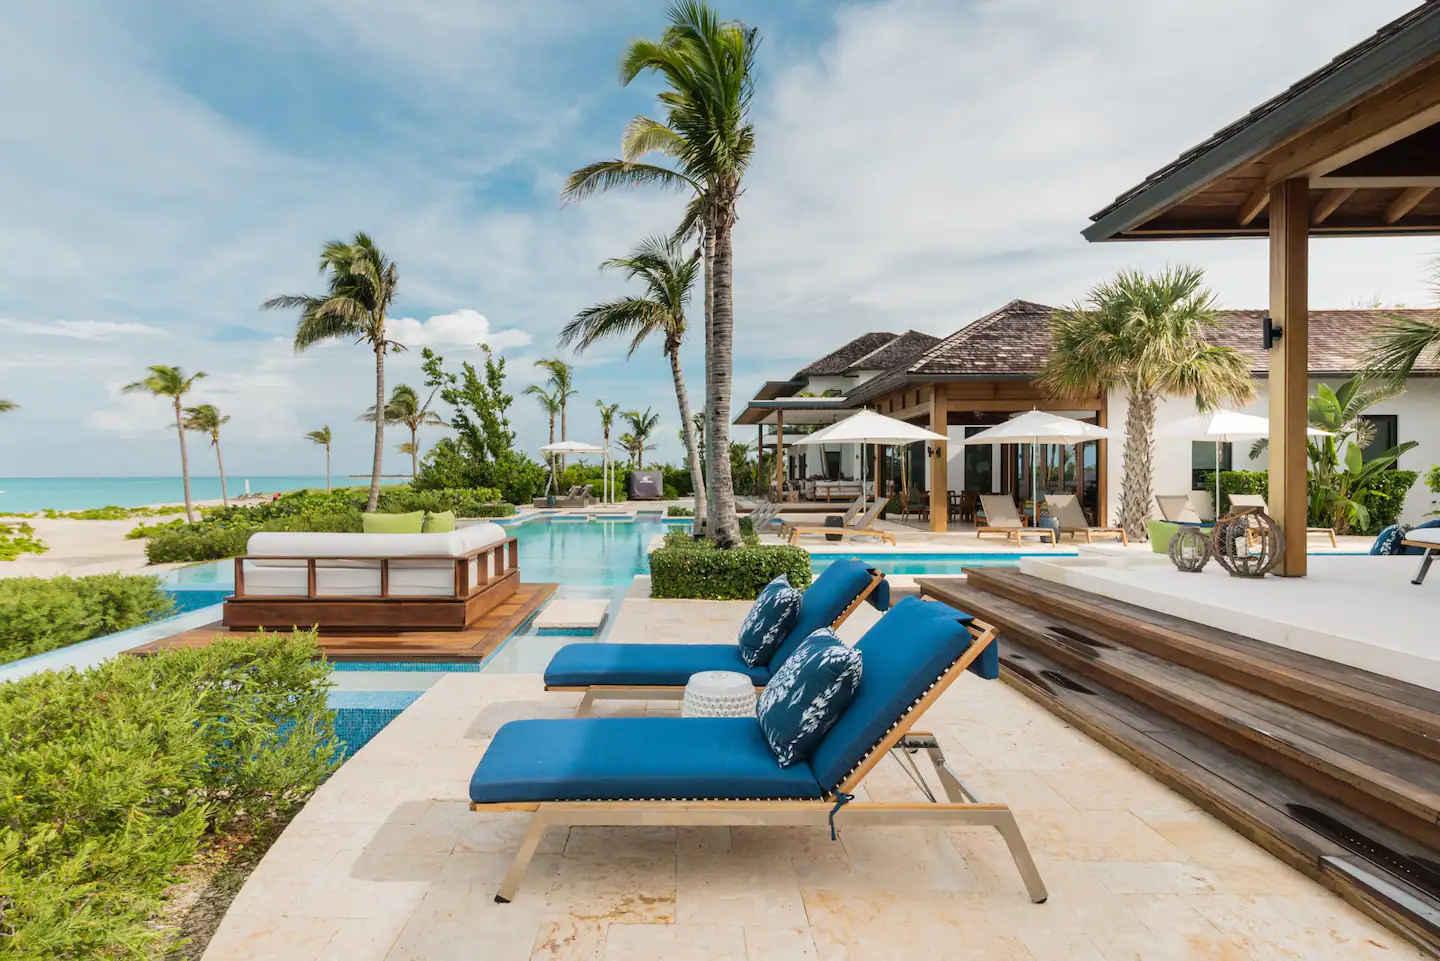 This Grace Bay beauty has a massive infinity pool that connects the house to a hot tub, floating day bed, and the sand and sea beyond.